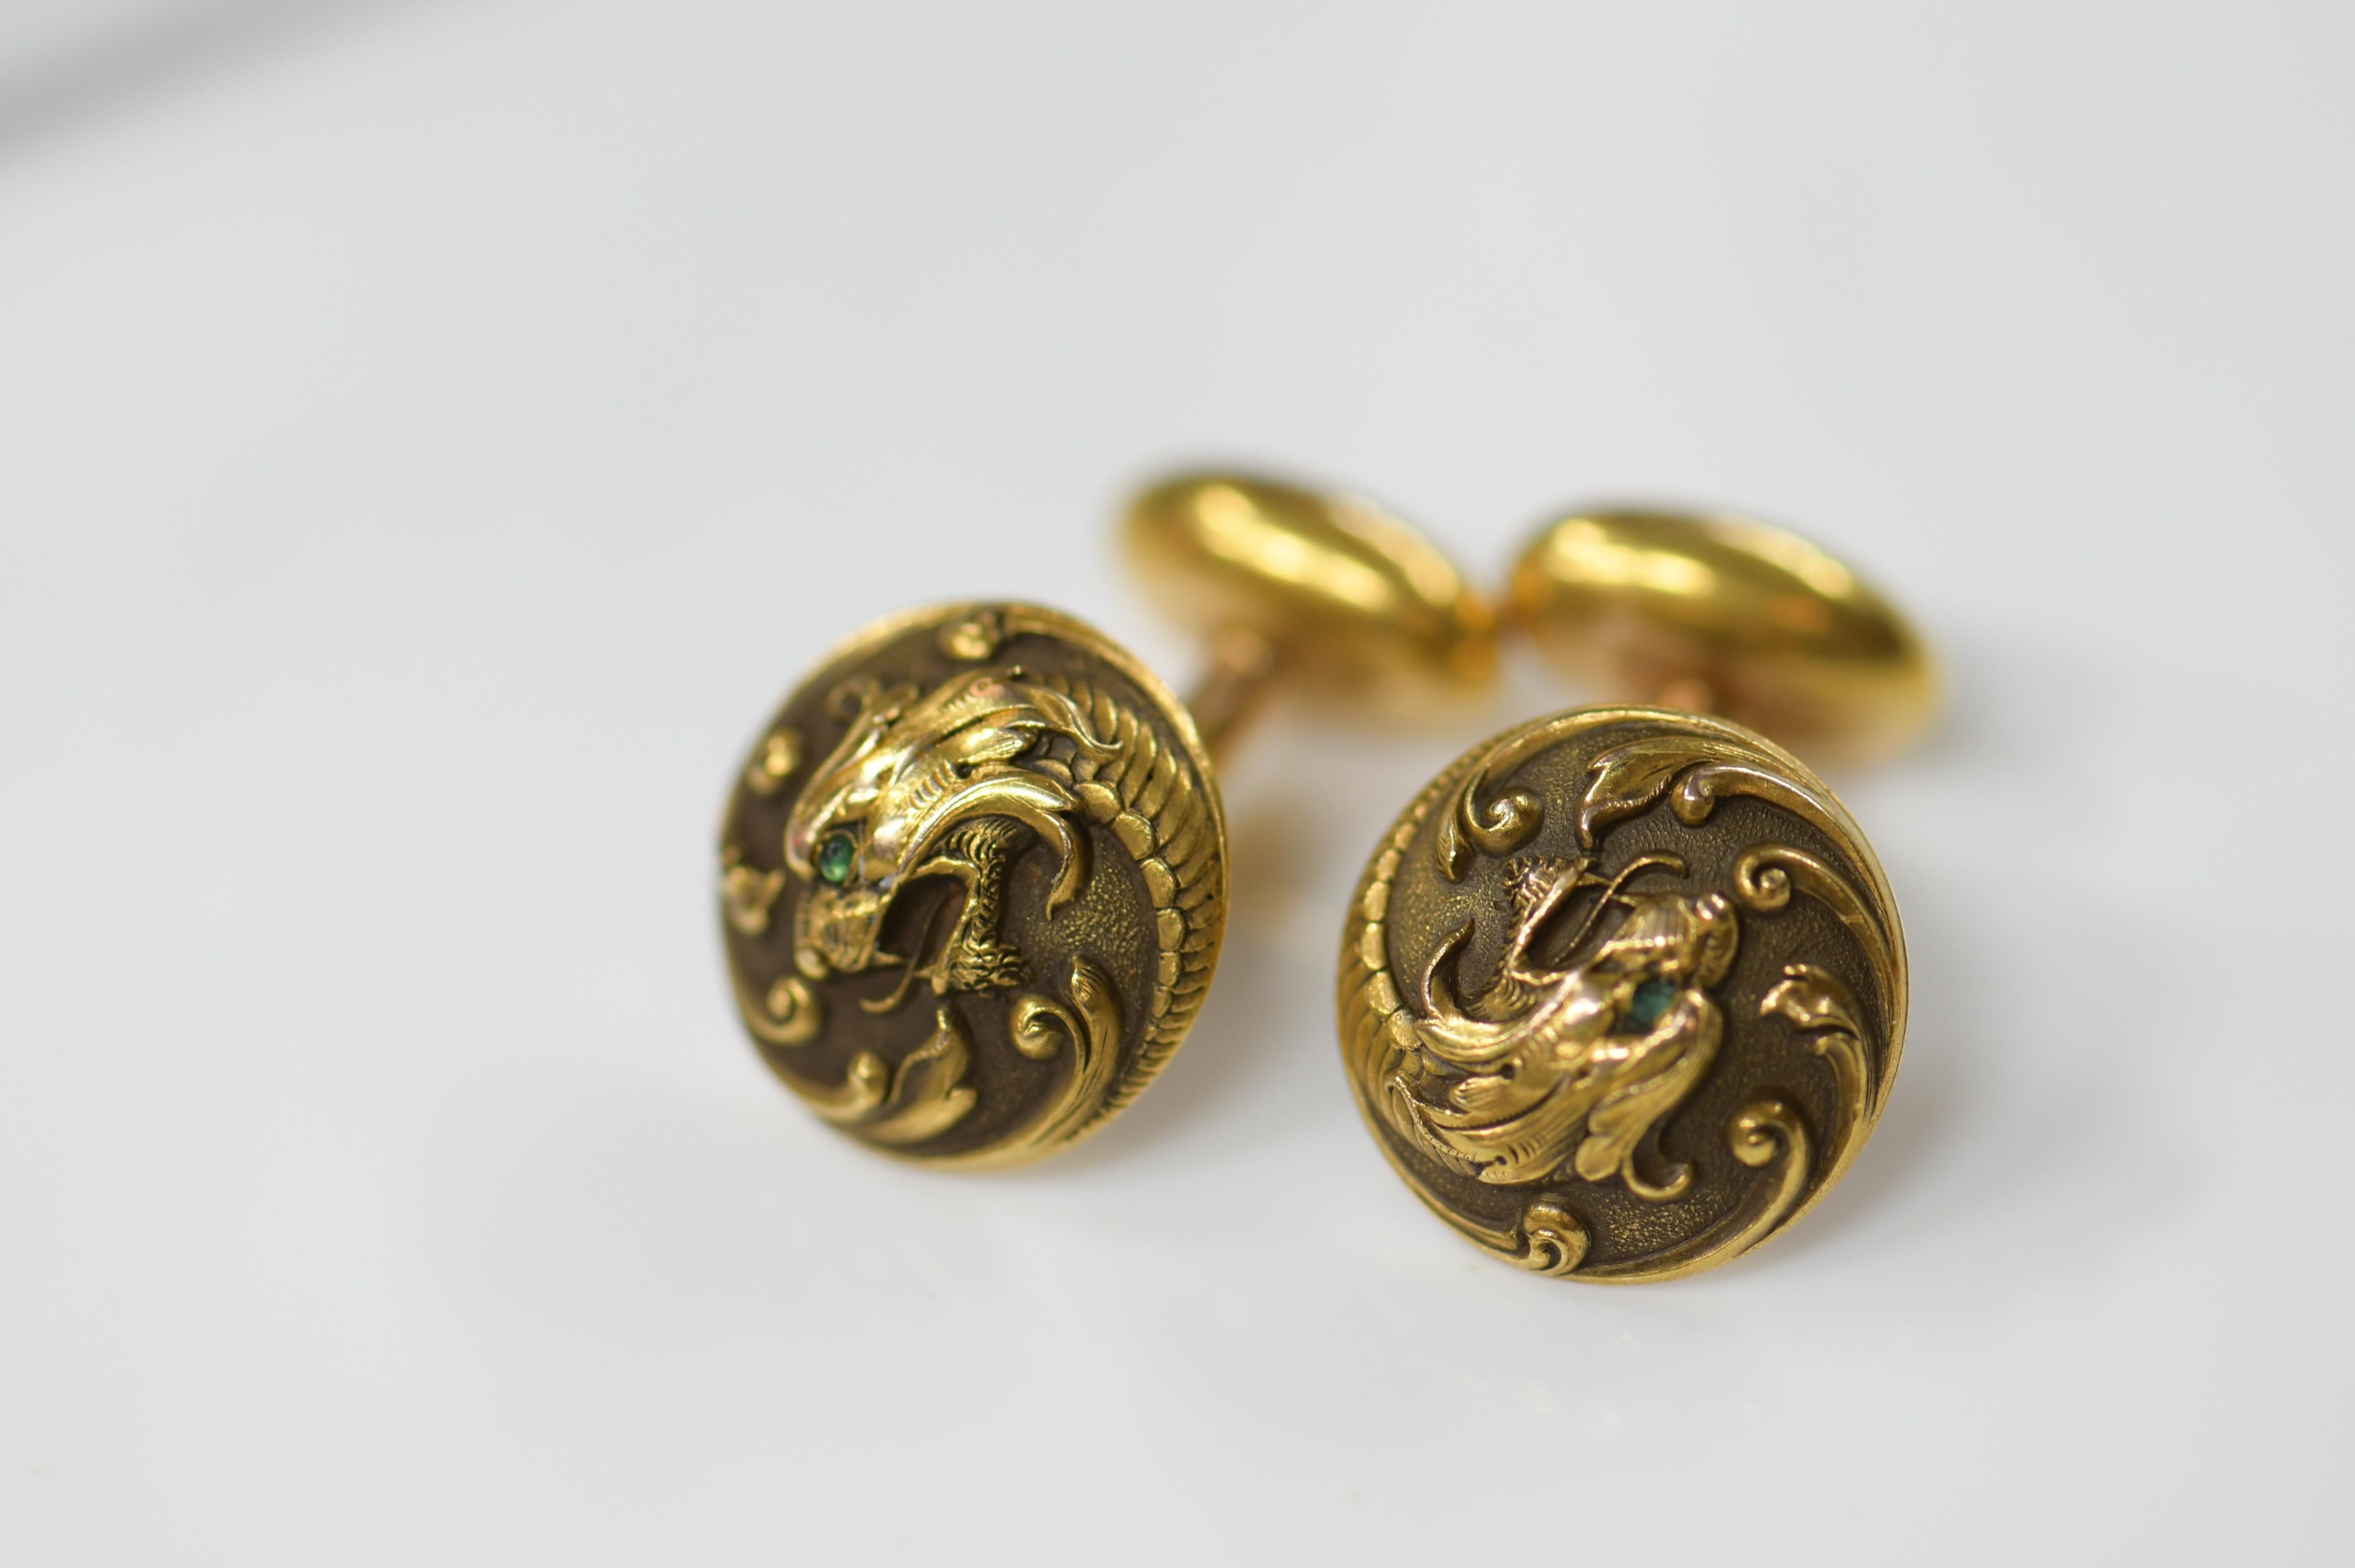 A stunning pair of antique 14 karat yellow gold cufflinks.

These fine and impressive antique gold cufflinks have been crafted in 14k gold settings.

 Dragon design and gold work is absolutely stunning. Unique collector piece. 

Perfect